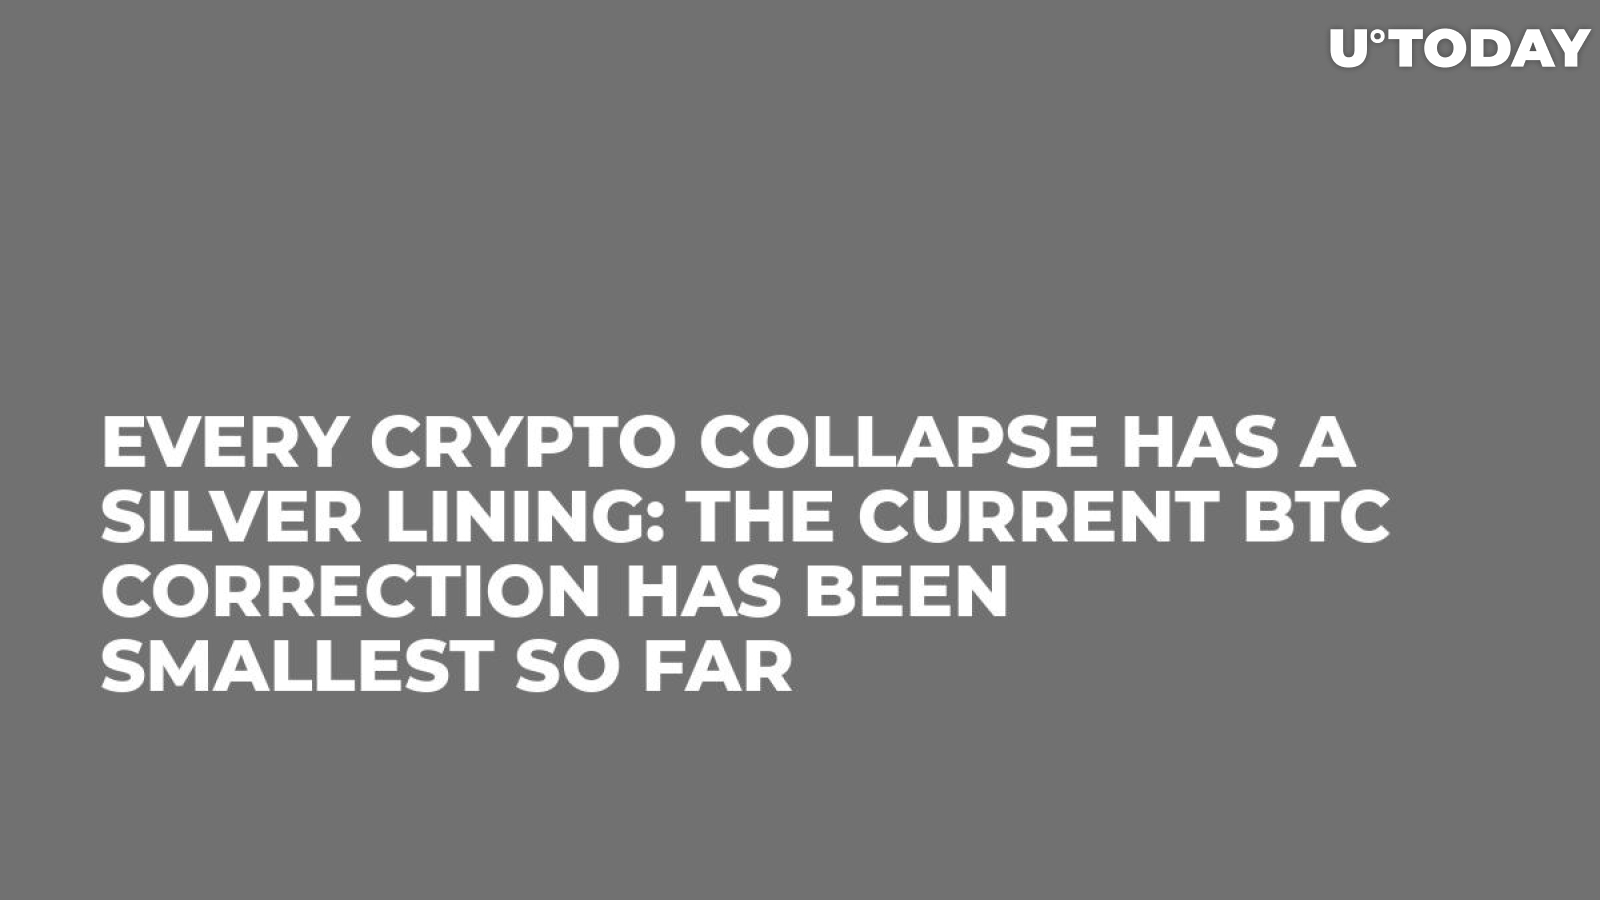 Every Crypto Collapse Has a Silver Lining: The Current BTC Correction Has Been Smallest So Far